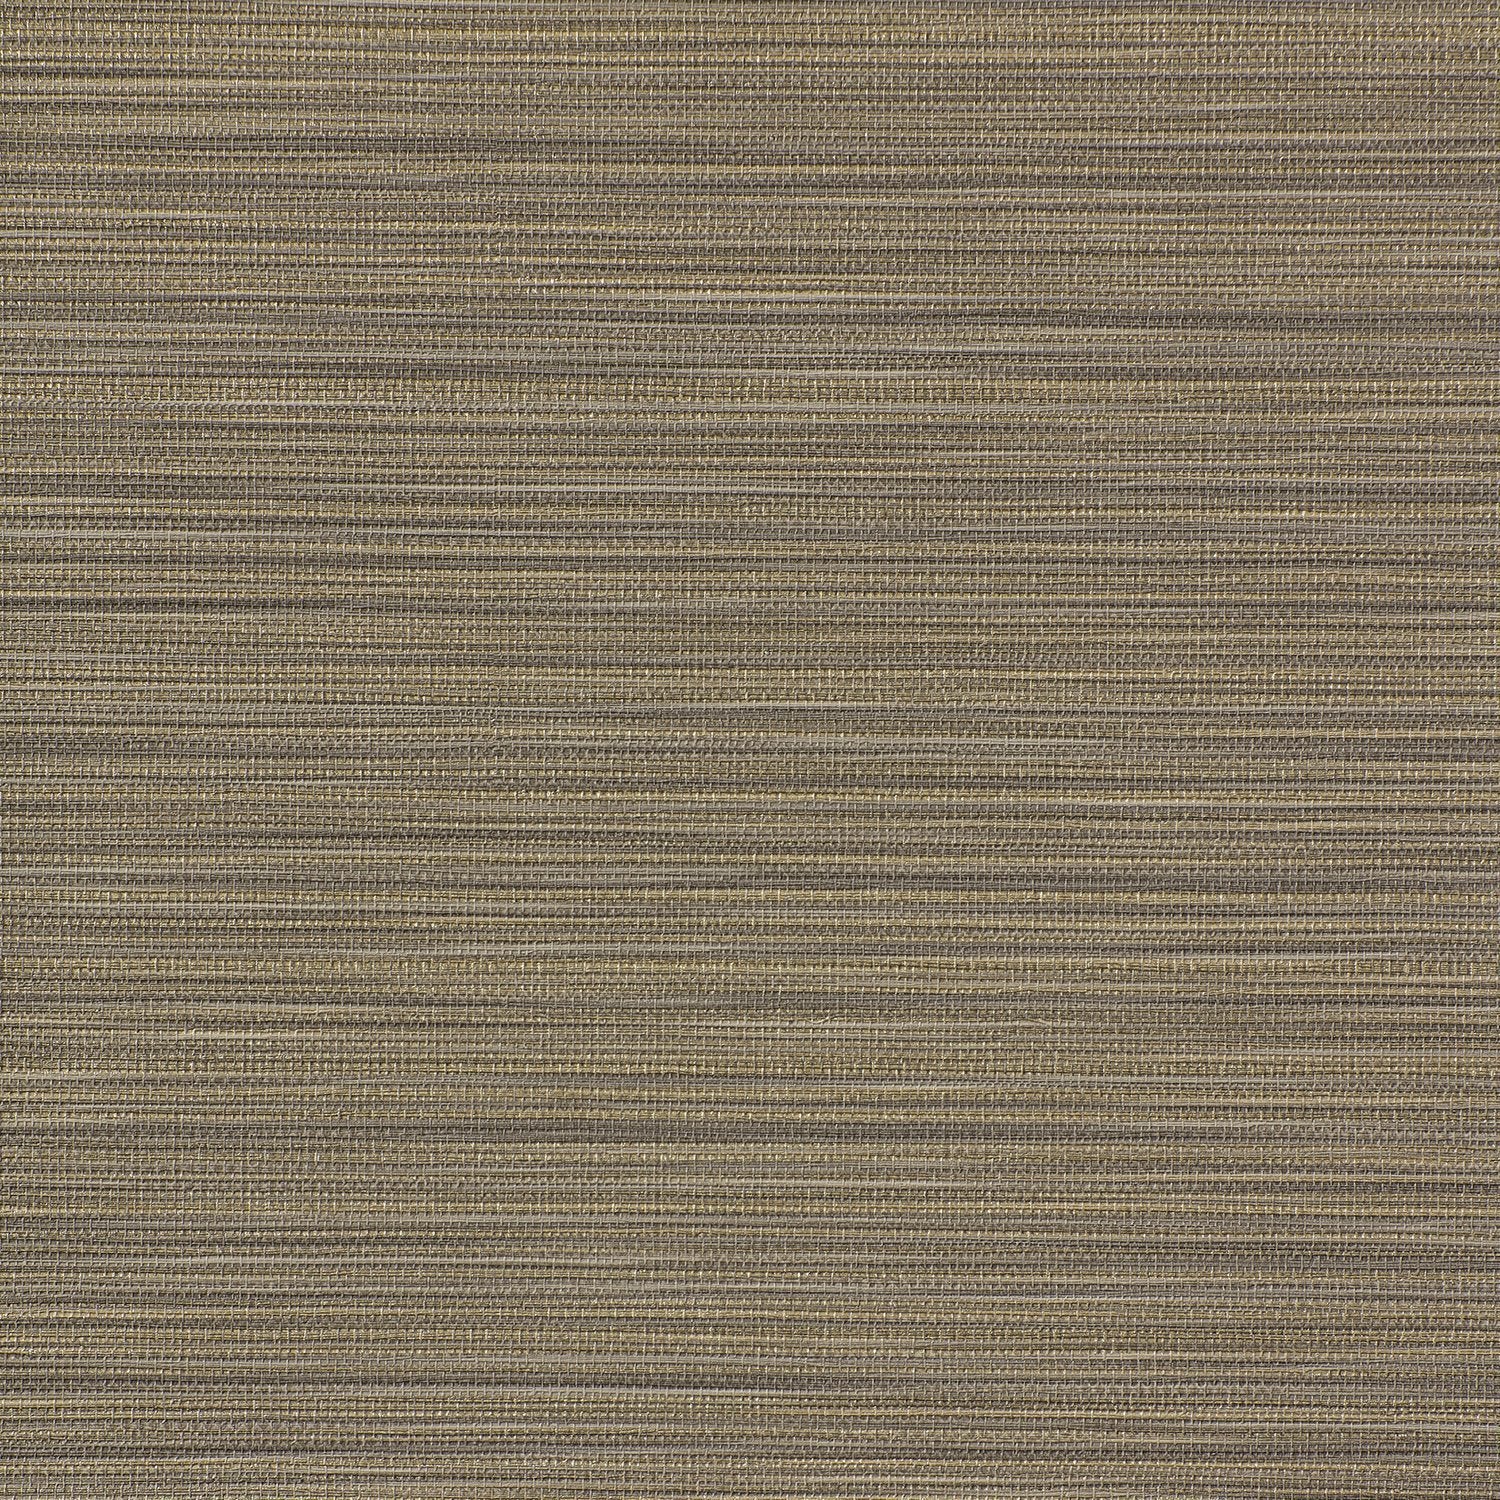 In Stitches - Y47805 - Wallcovering - Vycon - Kube Contract